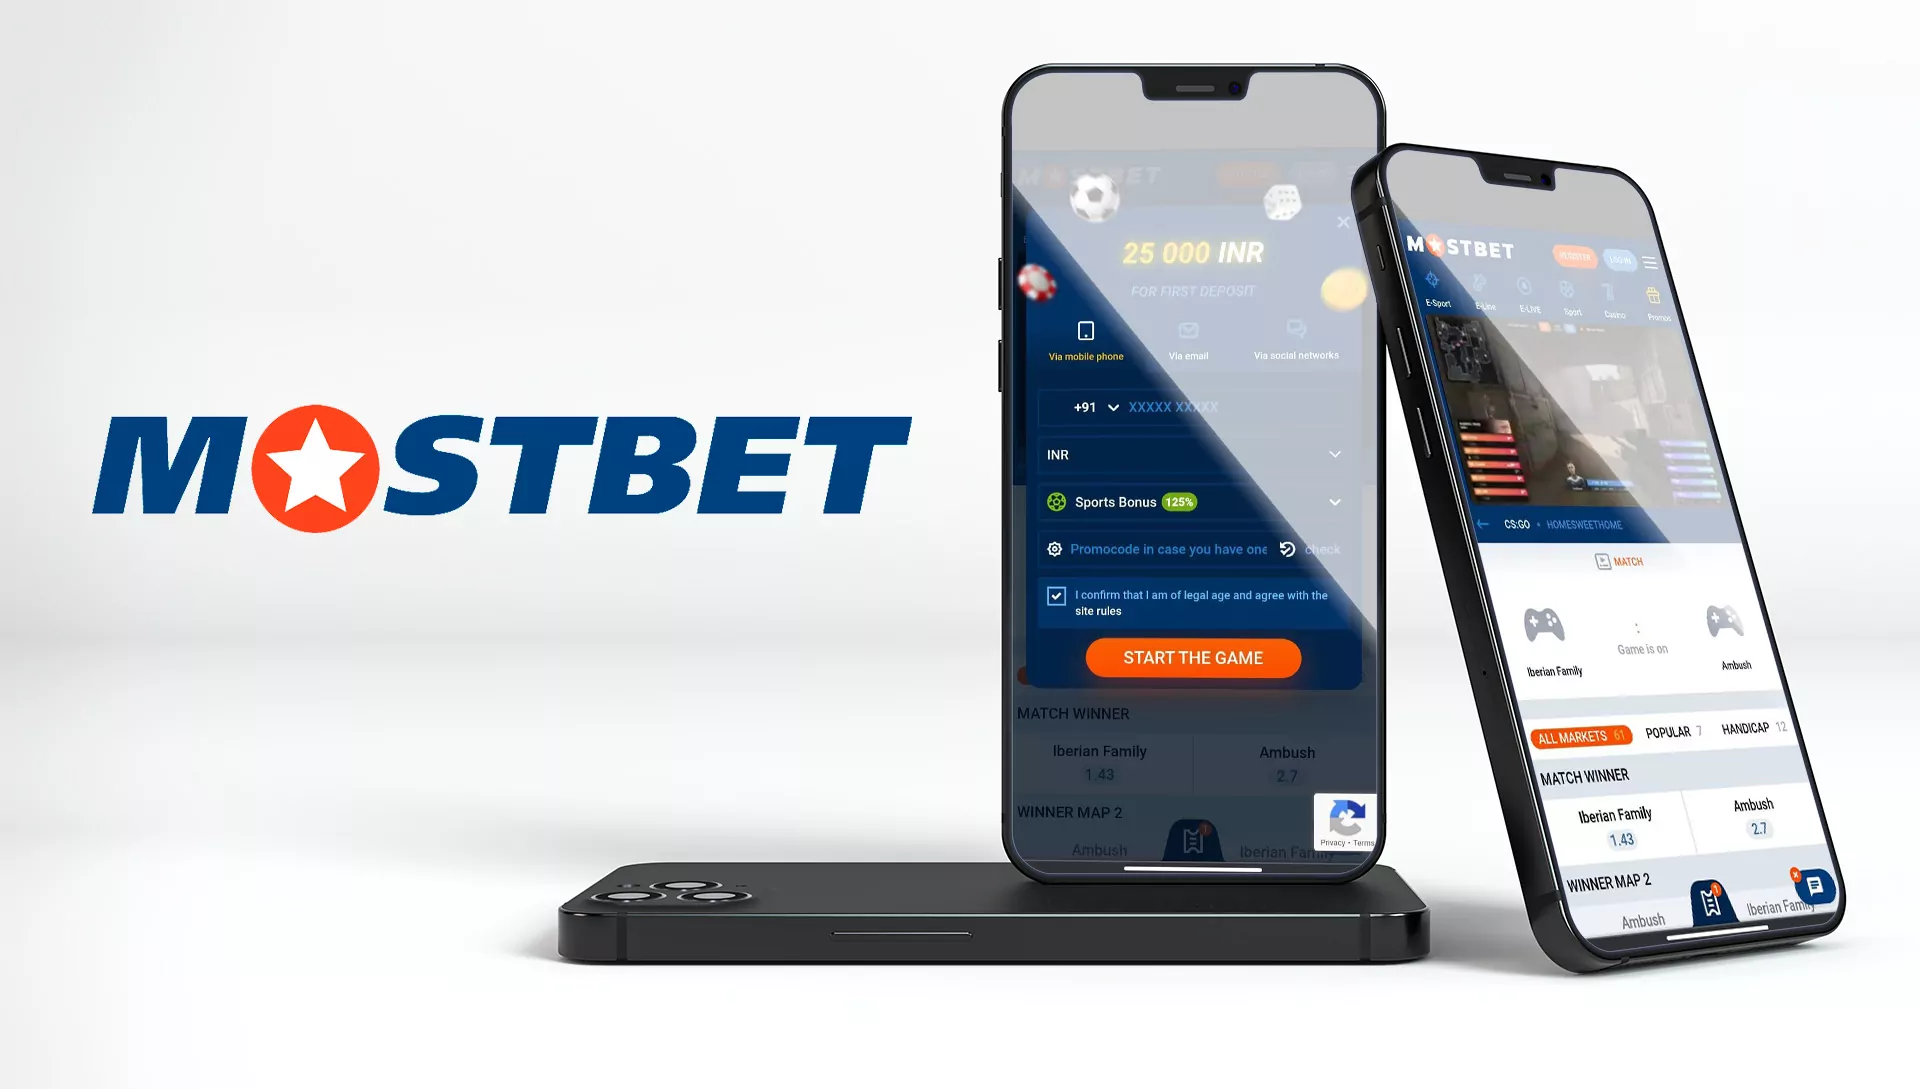 The Mostbet mobile app is much more convenient that the mobile browser version.